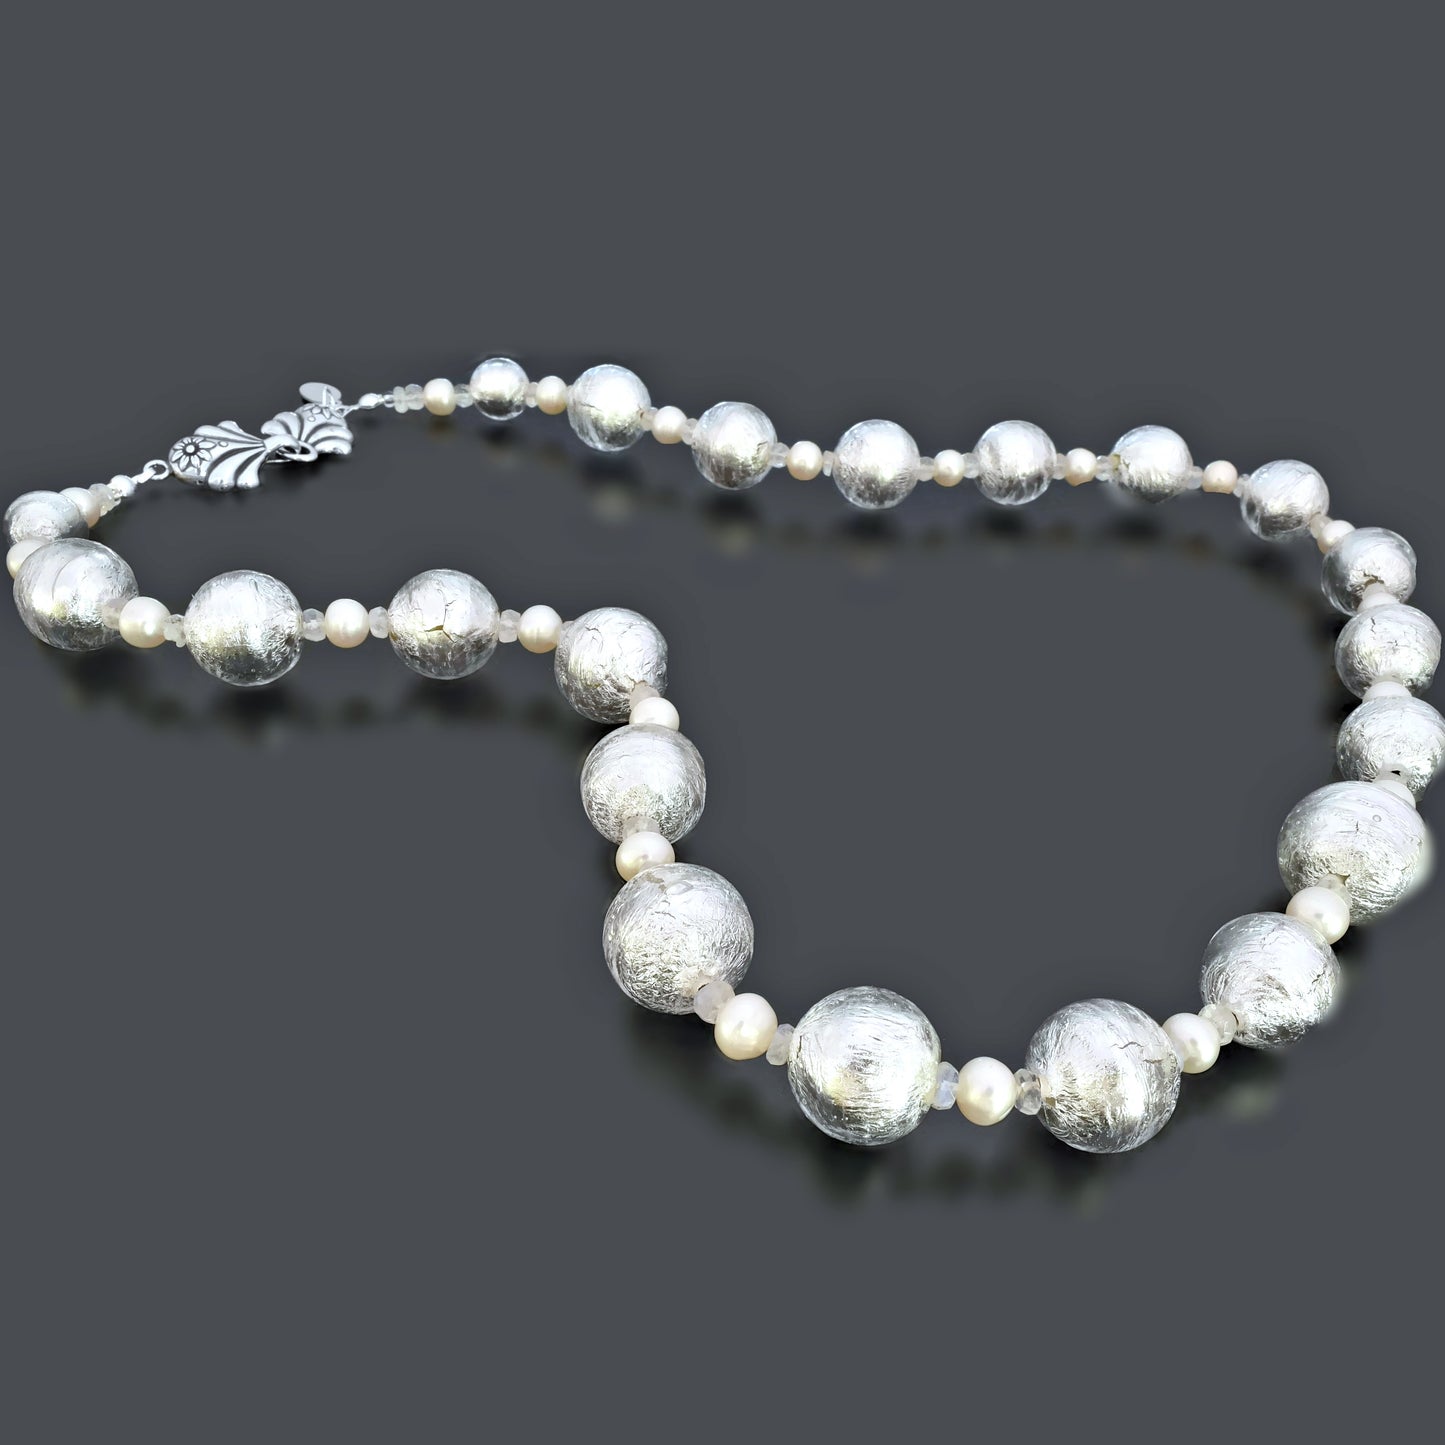 Silver Beaded Murano Glass Necklace with Moonstone and White Freshwater Pearl Sterling Silver 